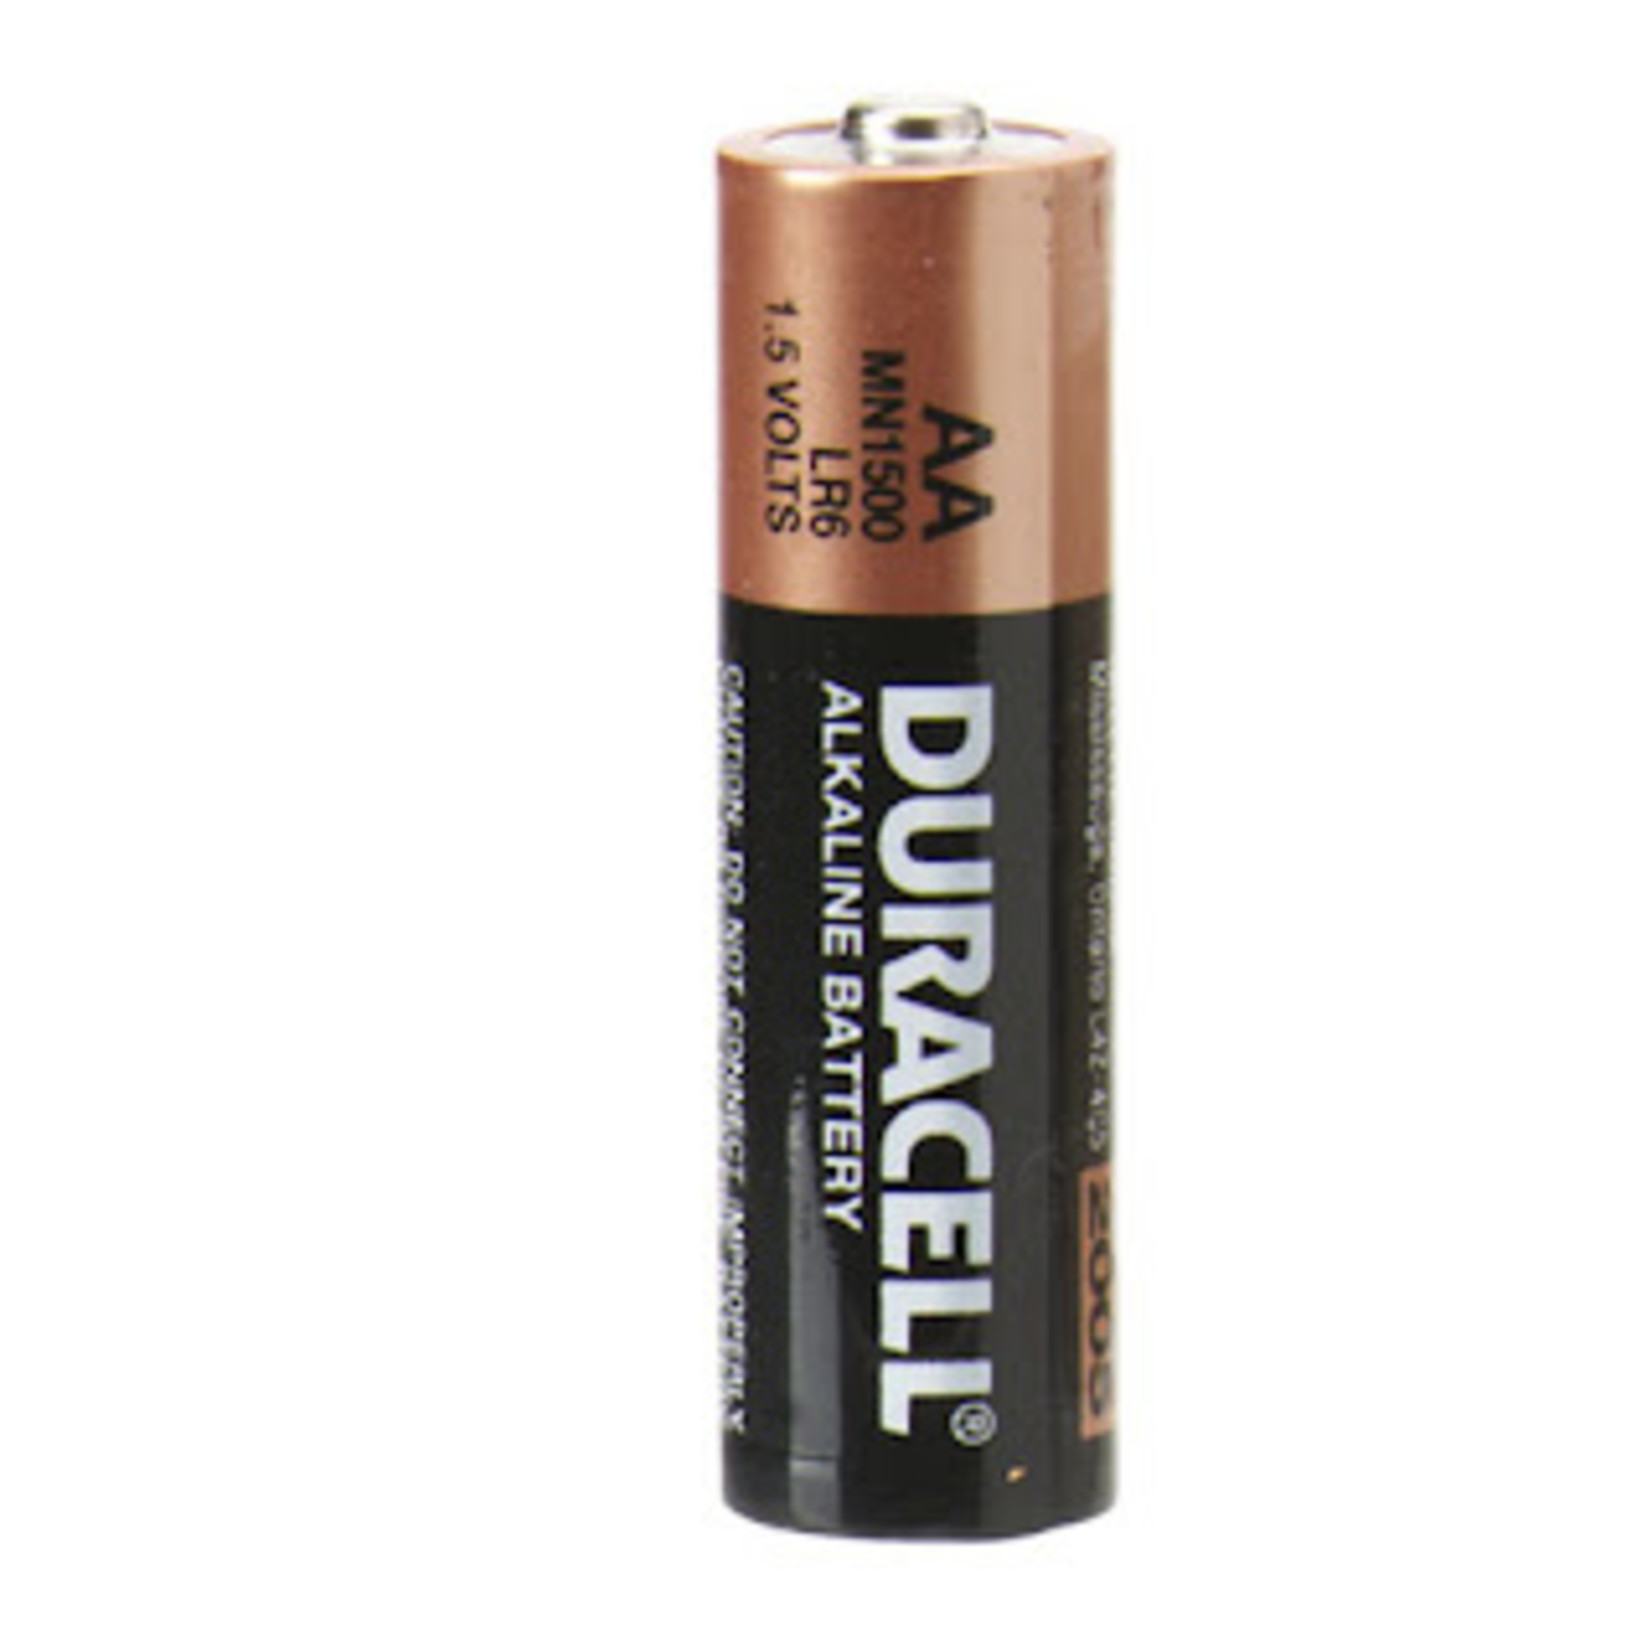 Duracell Duracell AA Batteries - 28 Count